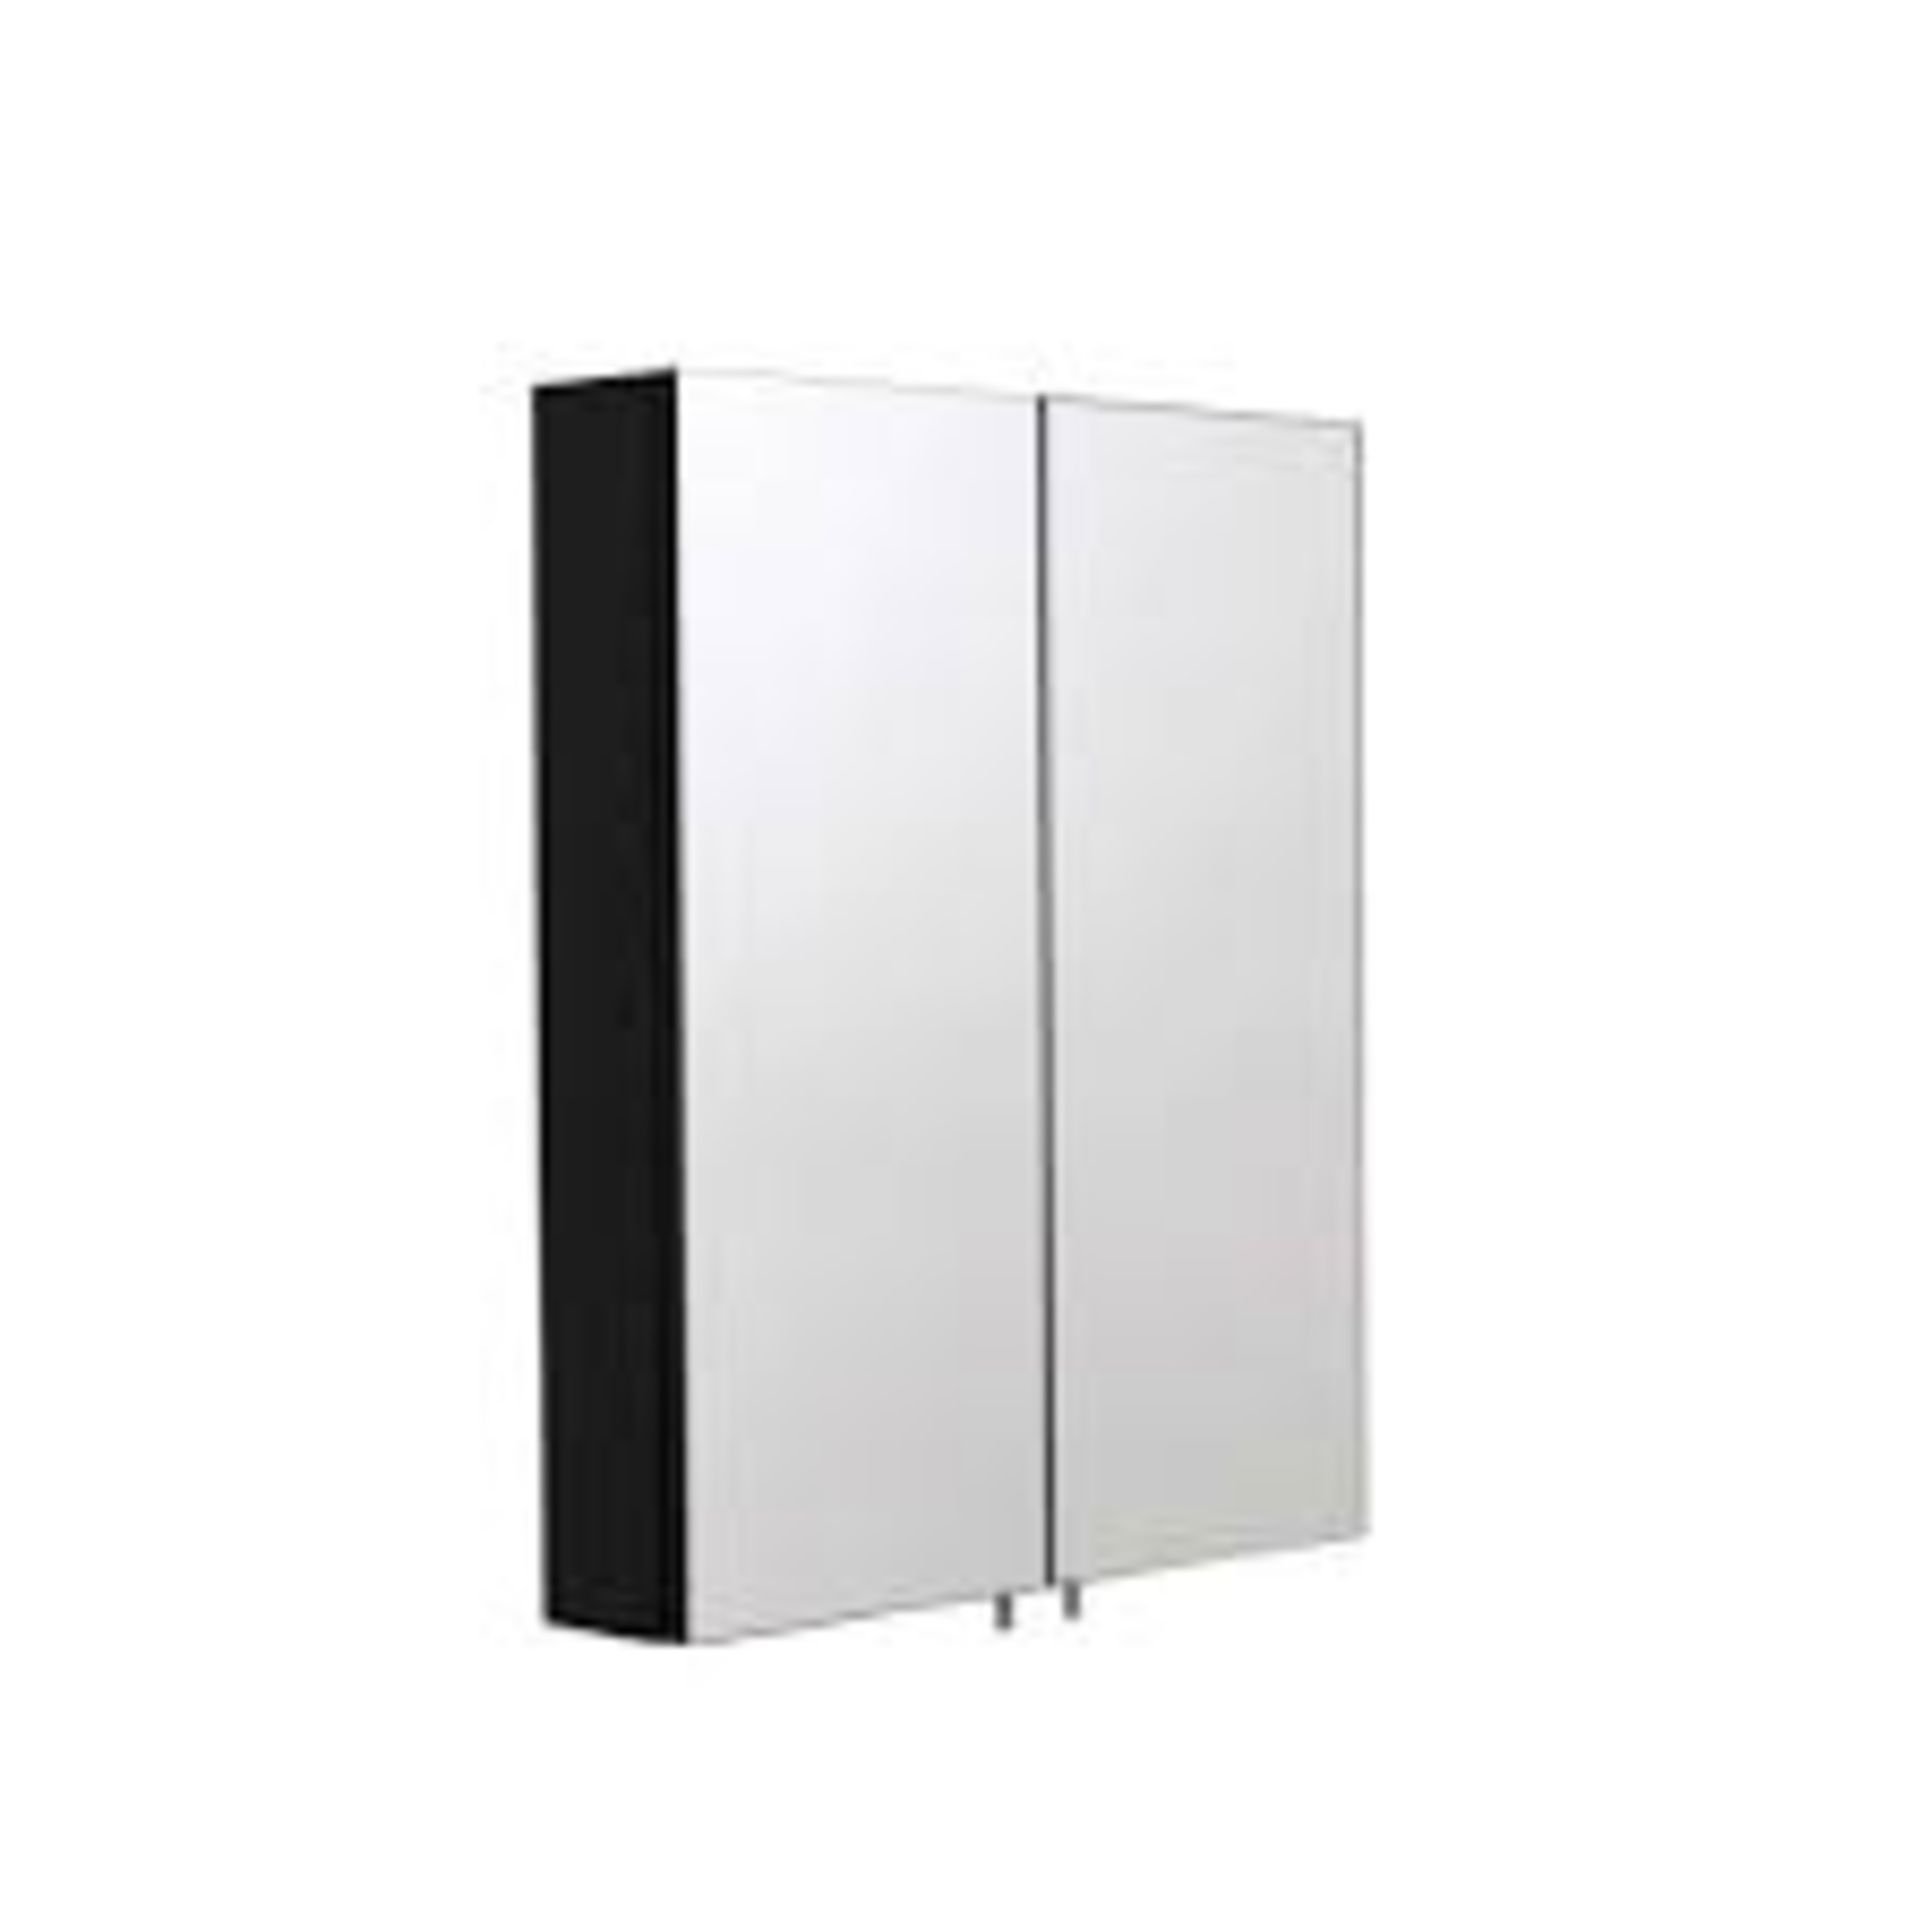 Croydex Dawley Double Door Cabinet - Black. - S2.7. easy fitting technology with 100 degrees soft